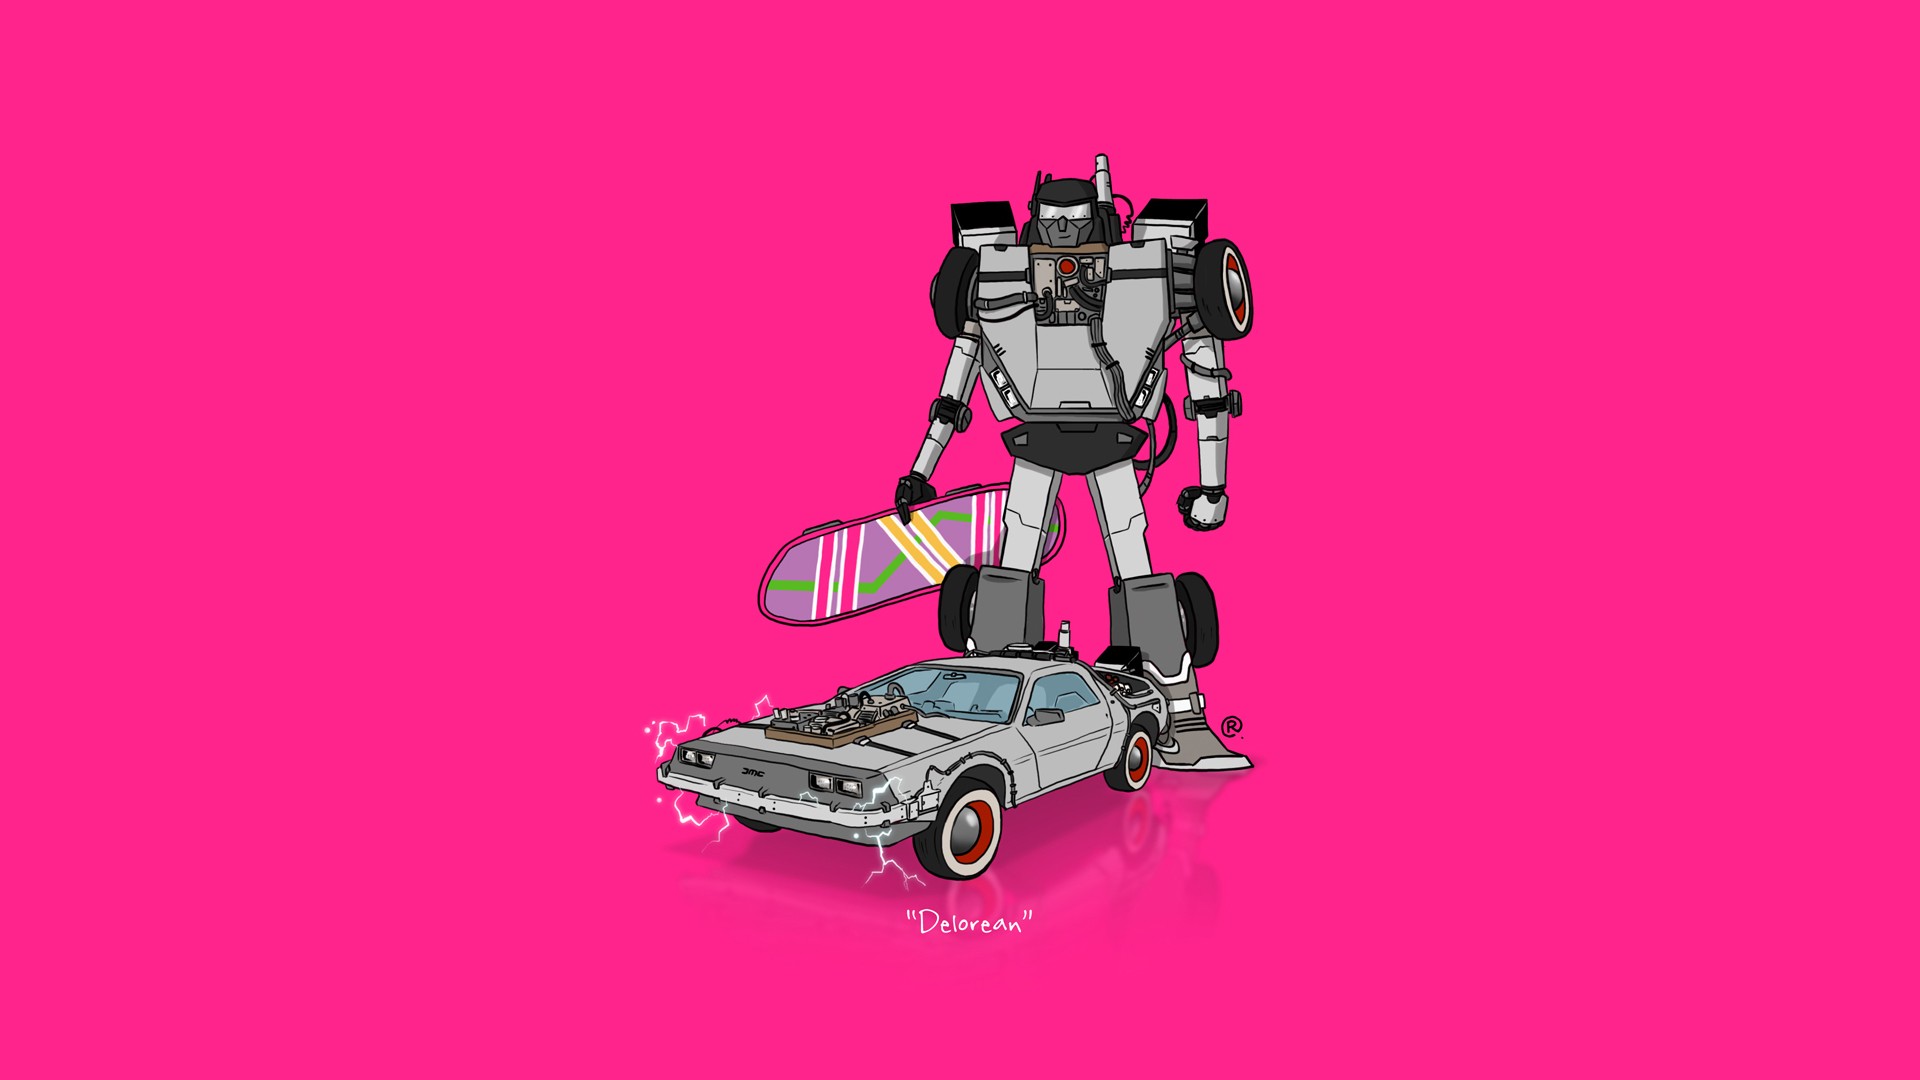 General 1920x1080 car Transformers minimalism DeLorean Back to the Future pink hoverboard crossover Time Machine robot pink background simple background vehicle movies Hasbro